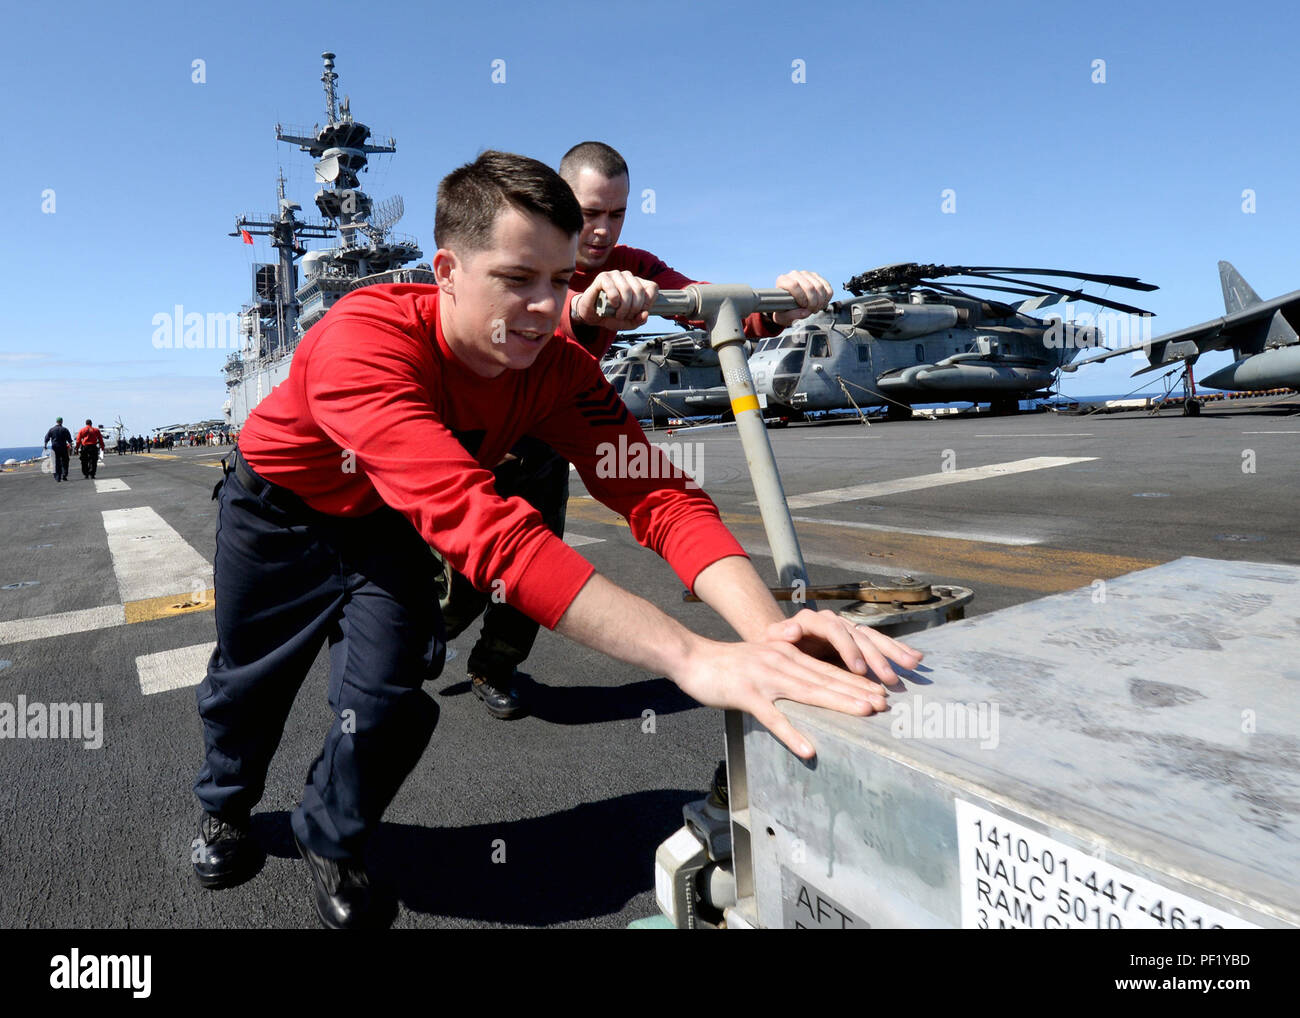 160224-N-GV721-228 PACIFIC OCEAN (Feb. 24, 2016) Aviation Ordnanceman 1st Class Ryan Heeney (left) and Aviation Ordnanceman 1st Class Michael Guidinger transport a guided missile round pack (GMRP) on the flight deck in preparation to load a RIM-116 Rolling Airframe Missile launcher aboard amphibious assault ship USS Boxer (LHD 4). More than 4,500 Sailors and Marines from the Boxer Amphibious Ready Group, 13th Marine Expeditionary Unit (13th MEU) team are currently transiting the Pacific Ocean toward the U.S. 7th Fleet area of operations during a scheduled deployment. (U.S. Navy photo by Mass C Stock Photo